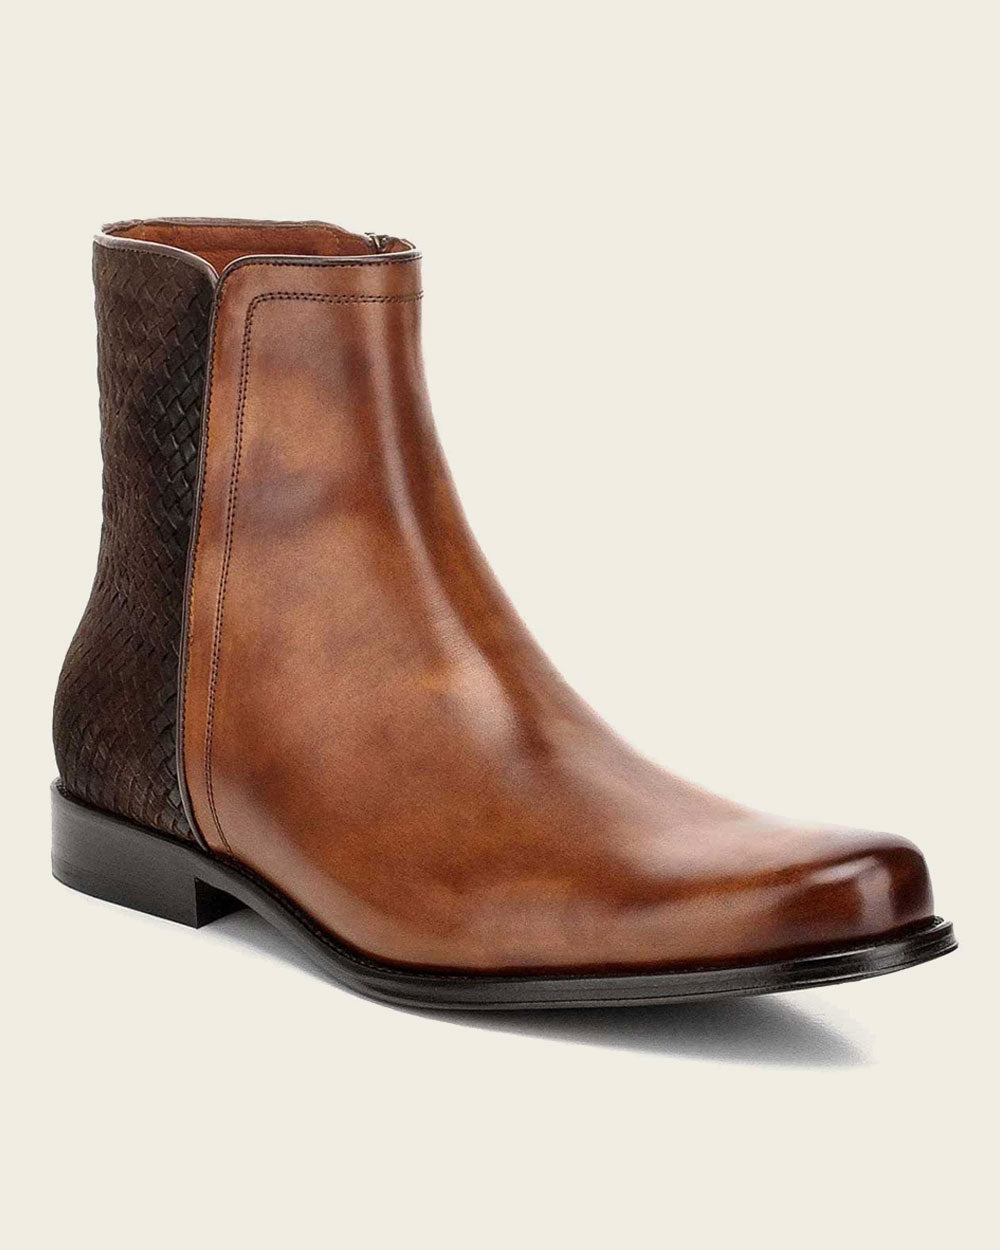 Artisanal honey leather boot with hand-painted finish and intricate handwoven application on the sides. Stand out in style.